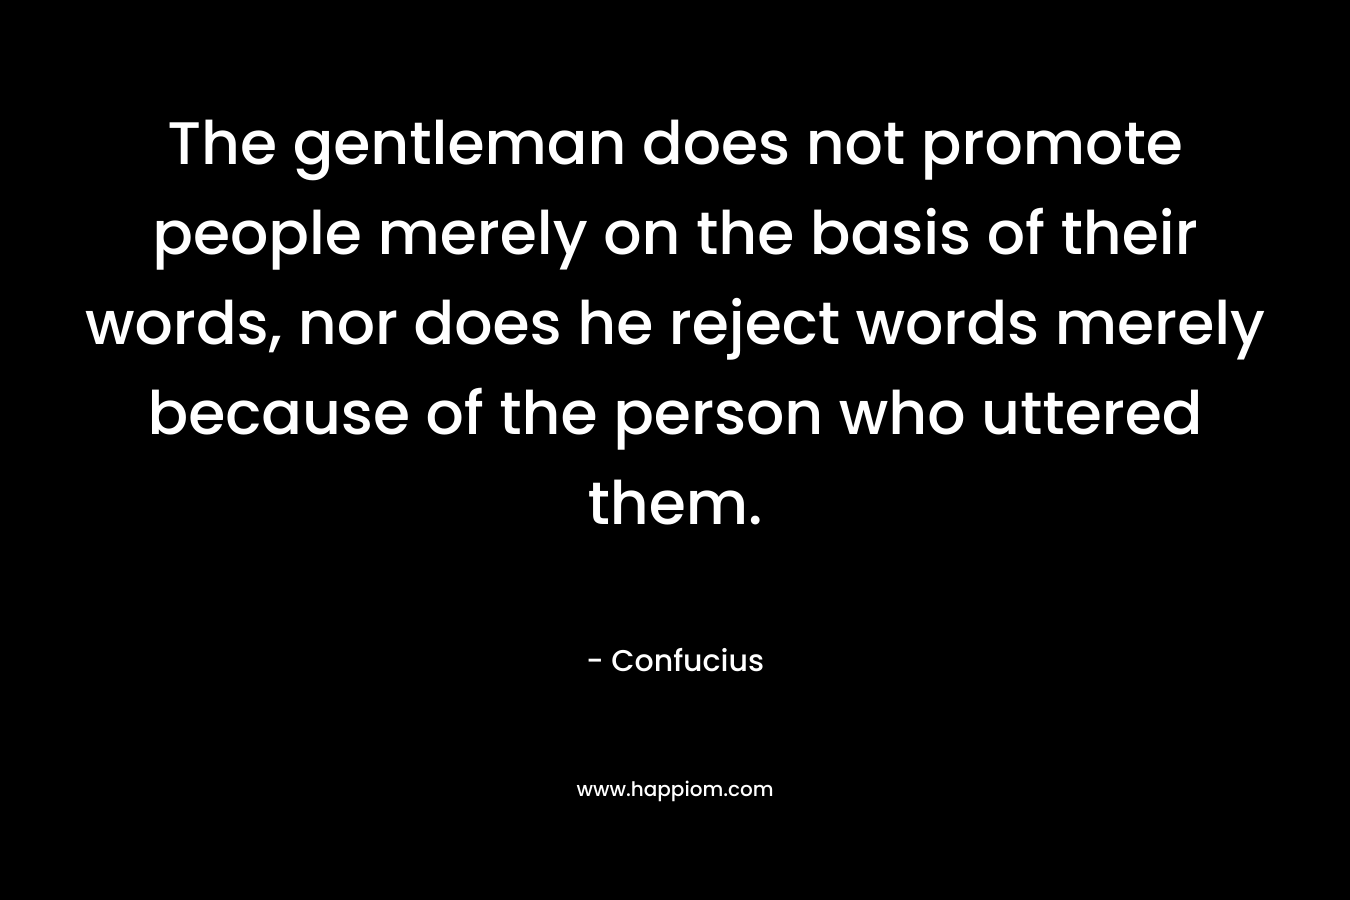 The gentleman does not promote people merely on the basis of their words, nor does he reject words merely because of the person who uttered them.